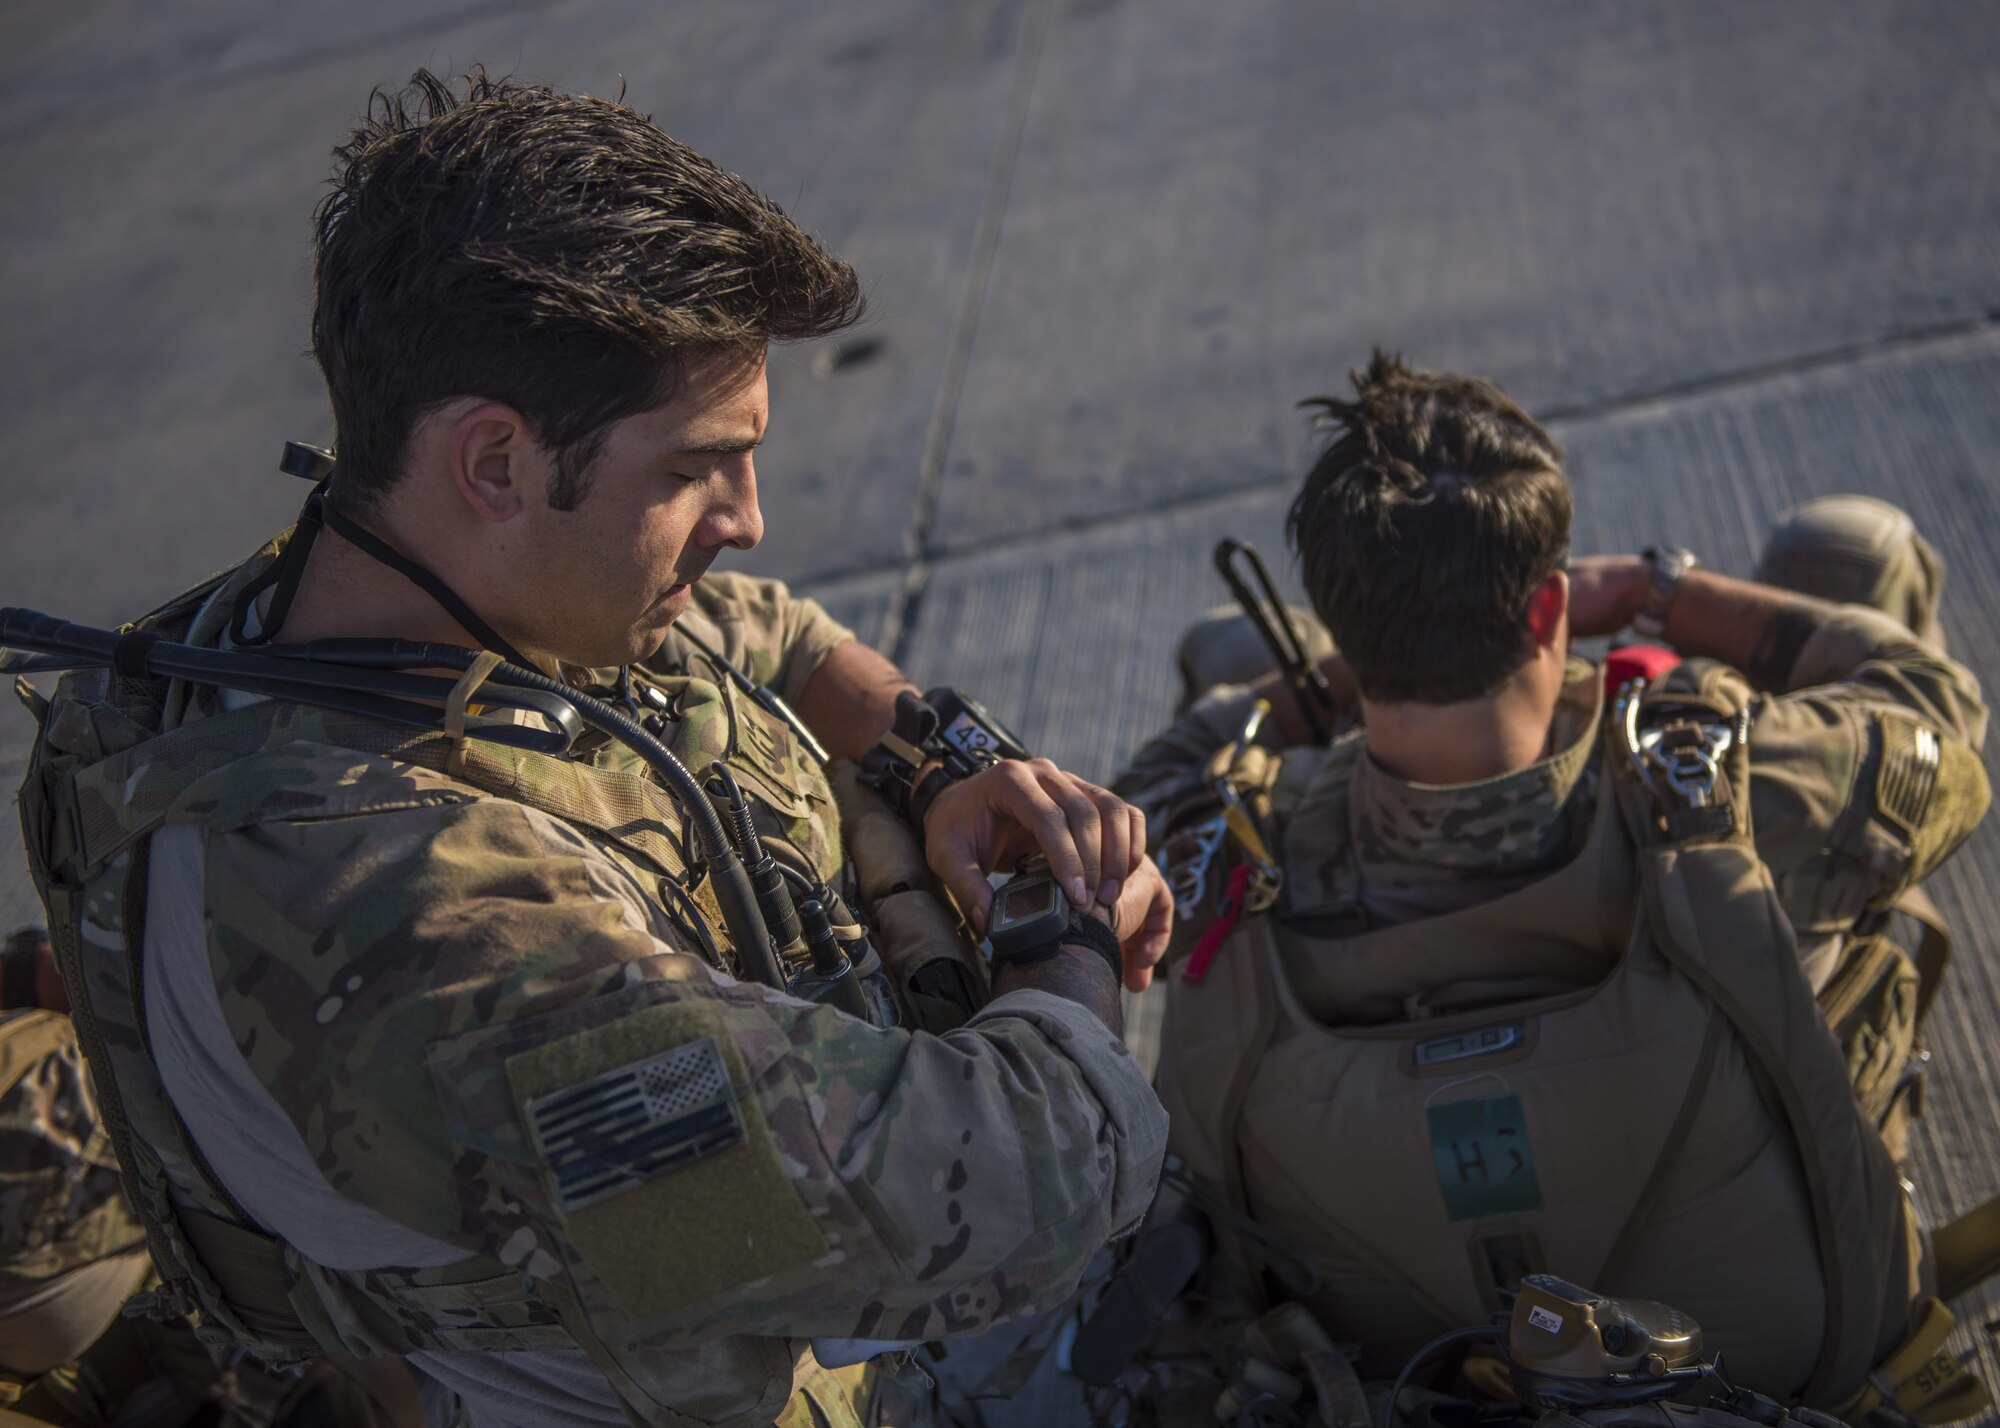 1st Lt. Nicholas Adagio, 83rd Expeditionary Rescue Squadron combat rescue officer, conducts a pre-jump check, Bagram Airfield, Afghanistan, Sept. 03, 2016. The 83rd ERQS provides the only U.S. personnel recovery assets in Afghanistan. In order to maintain readiness and skill level, they participate in real world scenario exercises. (U.S. Air Force photo by Senior Airman Justyn M. Freeman)